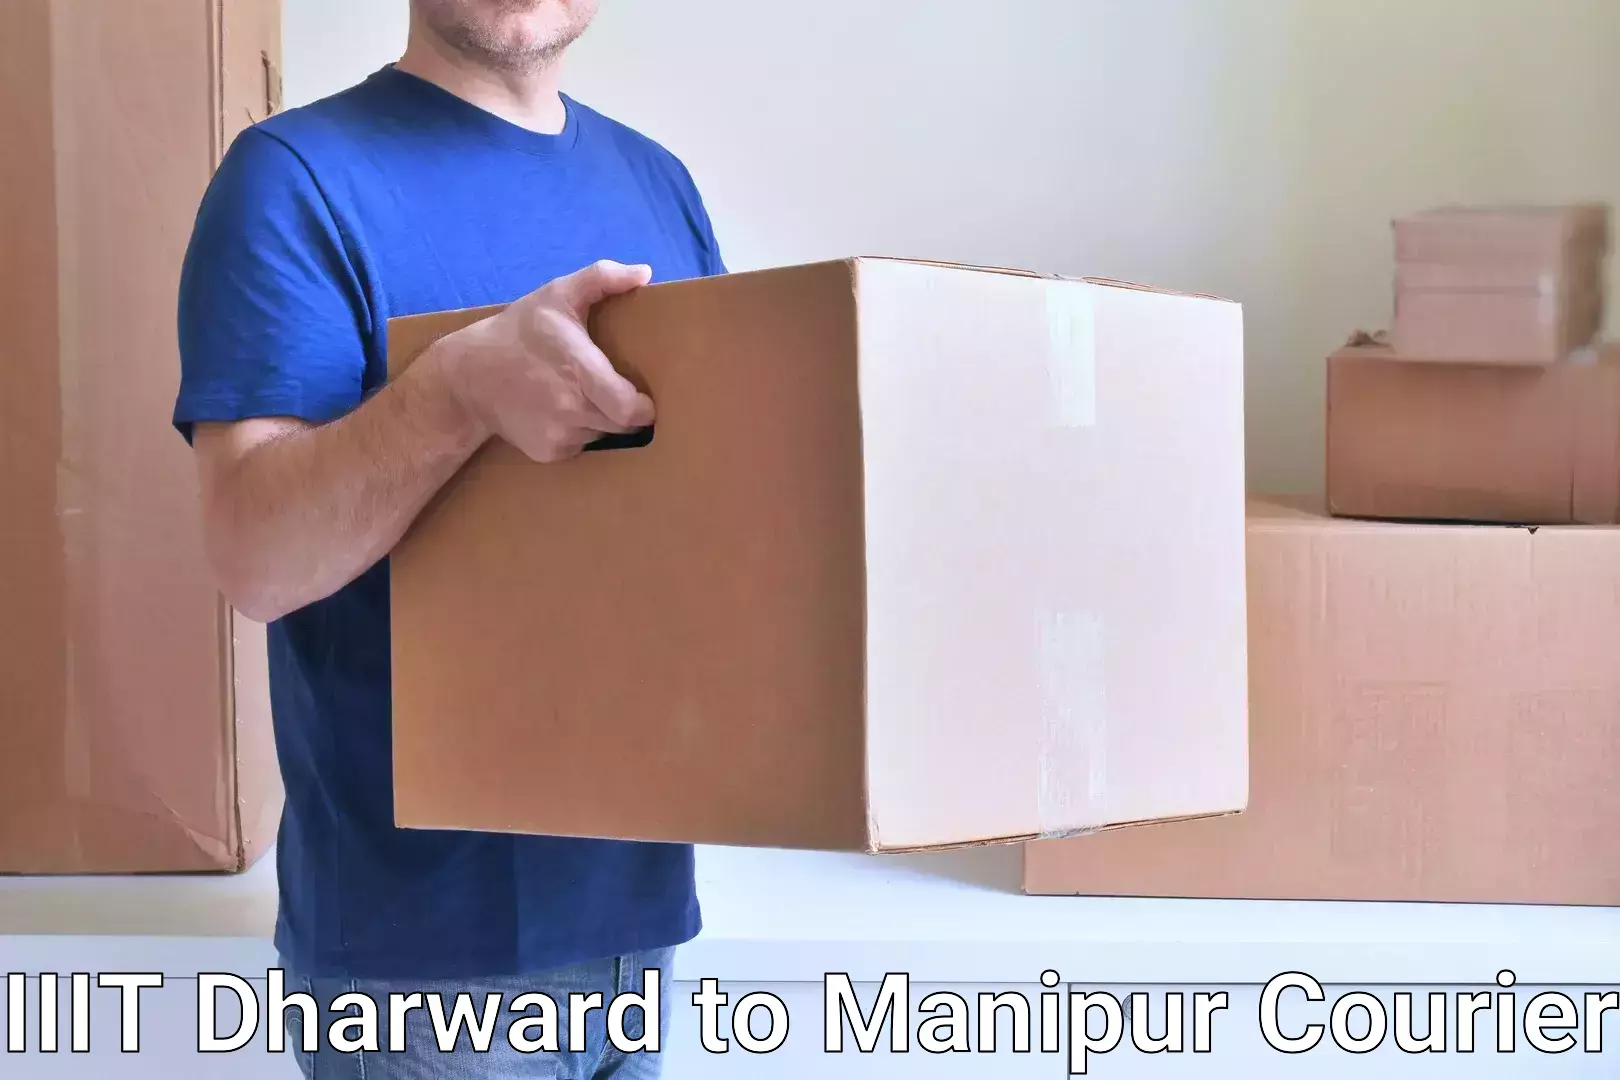 Seamless shipping experience IIIT Dharward to Manipur